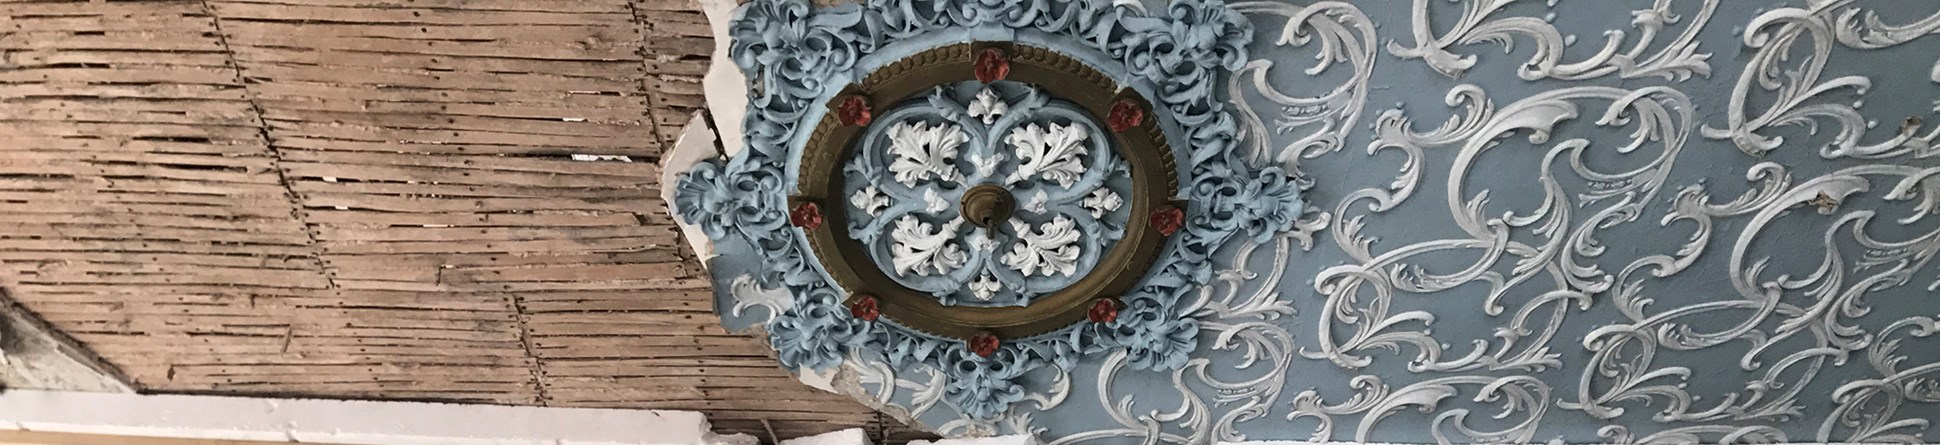 Victorian ‘Lincrusta’ wallpaper on the ceiling of the Blue Room, photographed during repairs.